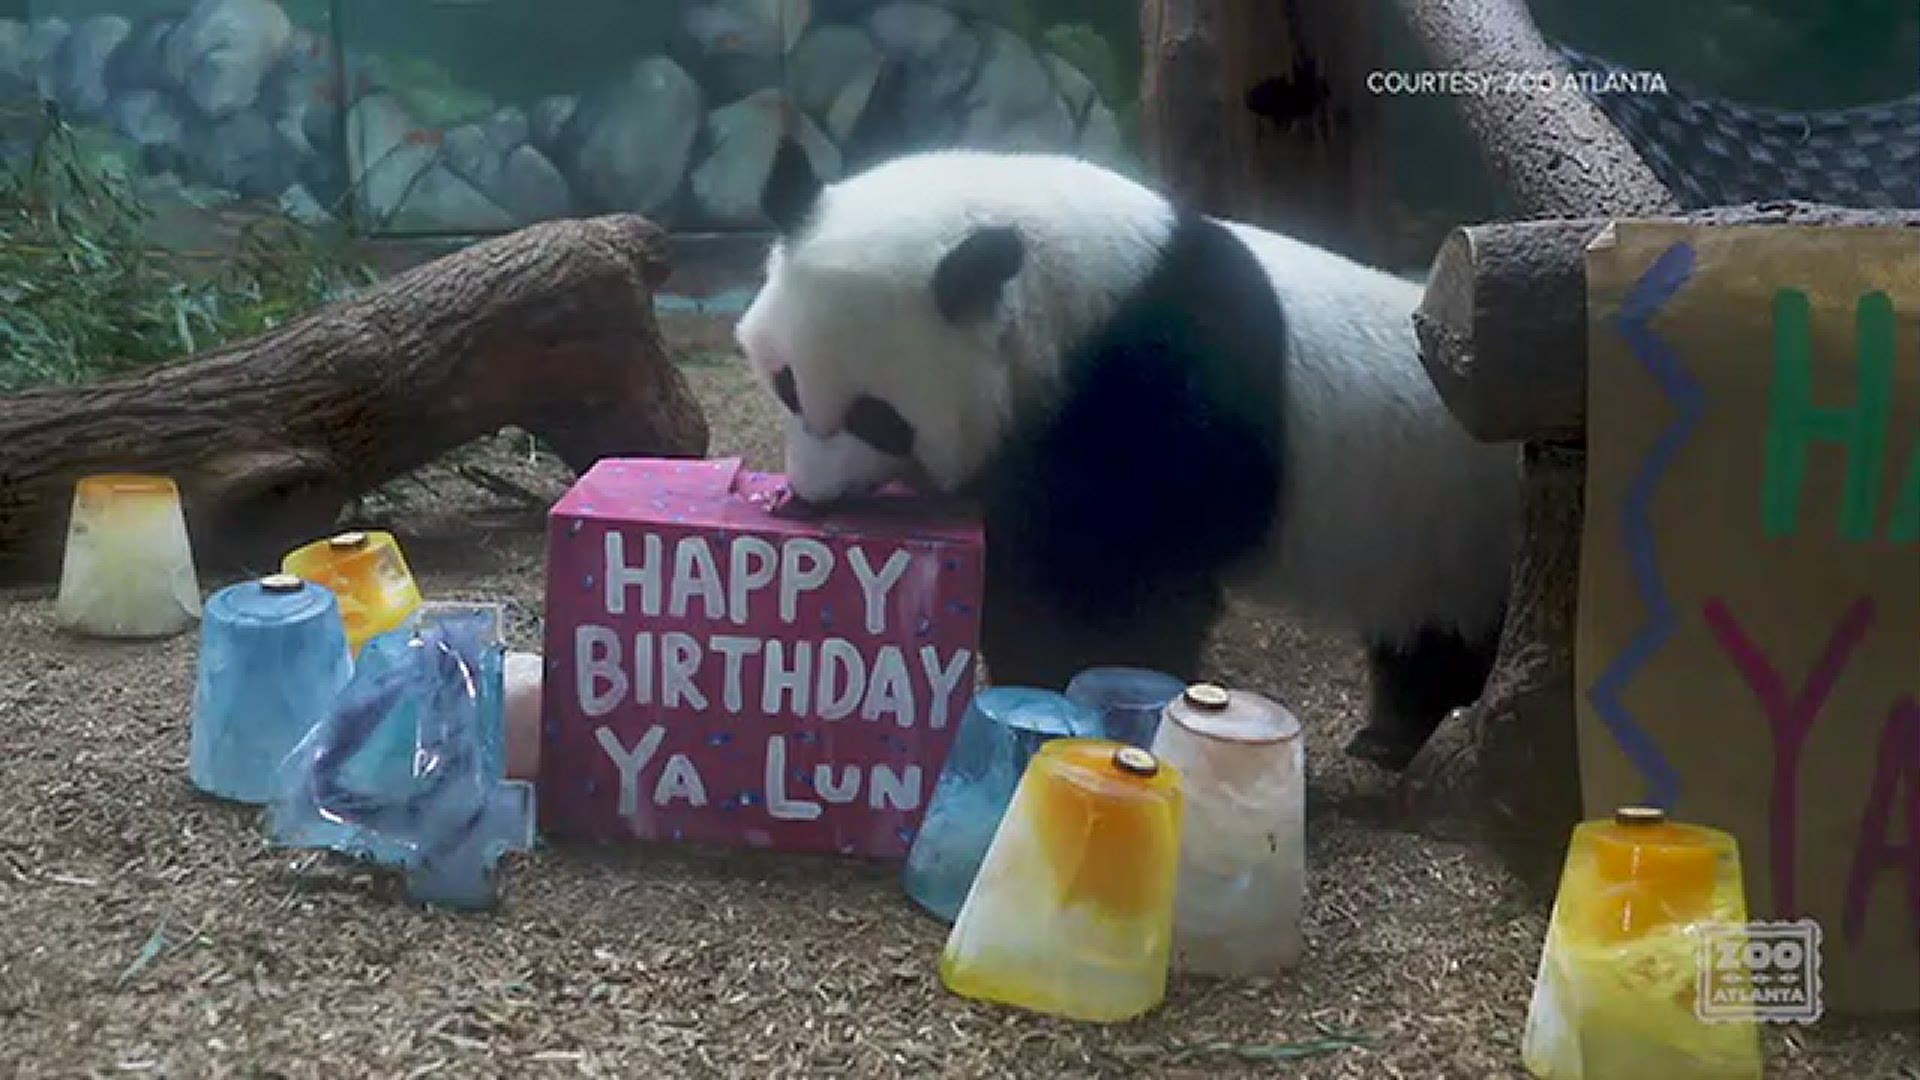 The zoo said Ya Lun and Xi Lun are the only giant panda twins in the U.S.